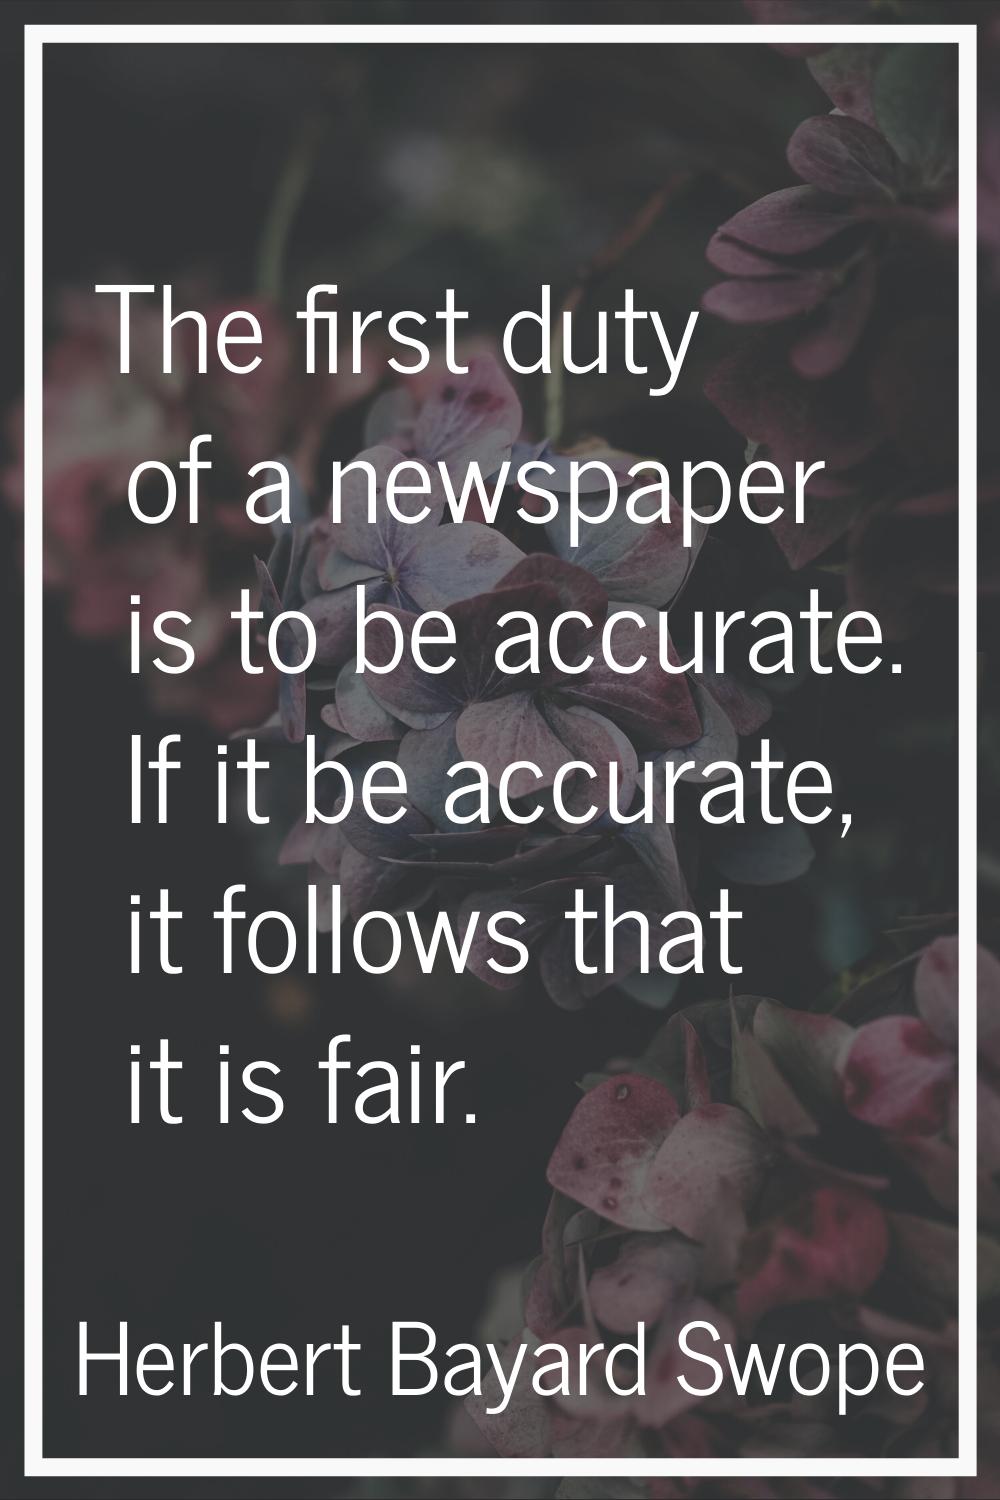 The first duty of a newspaper is to be accurate. If it be accurate, it follows that it is fair.